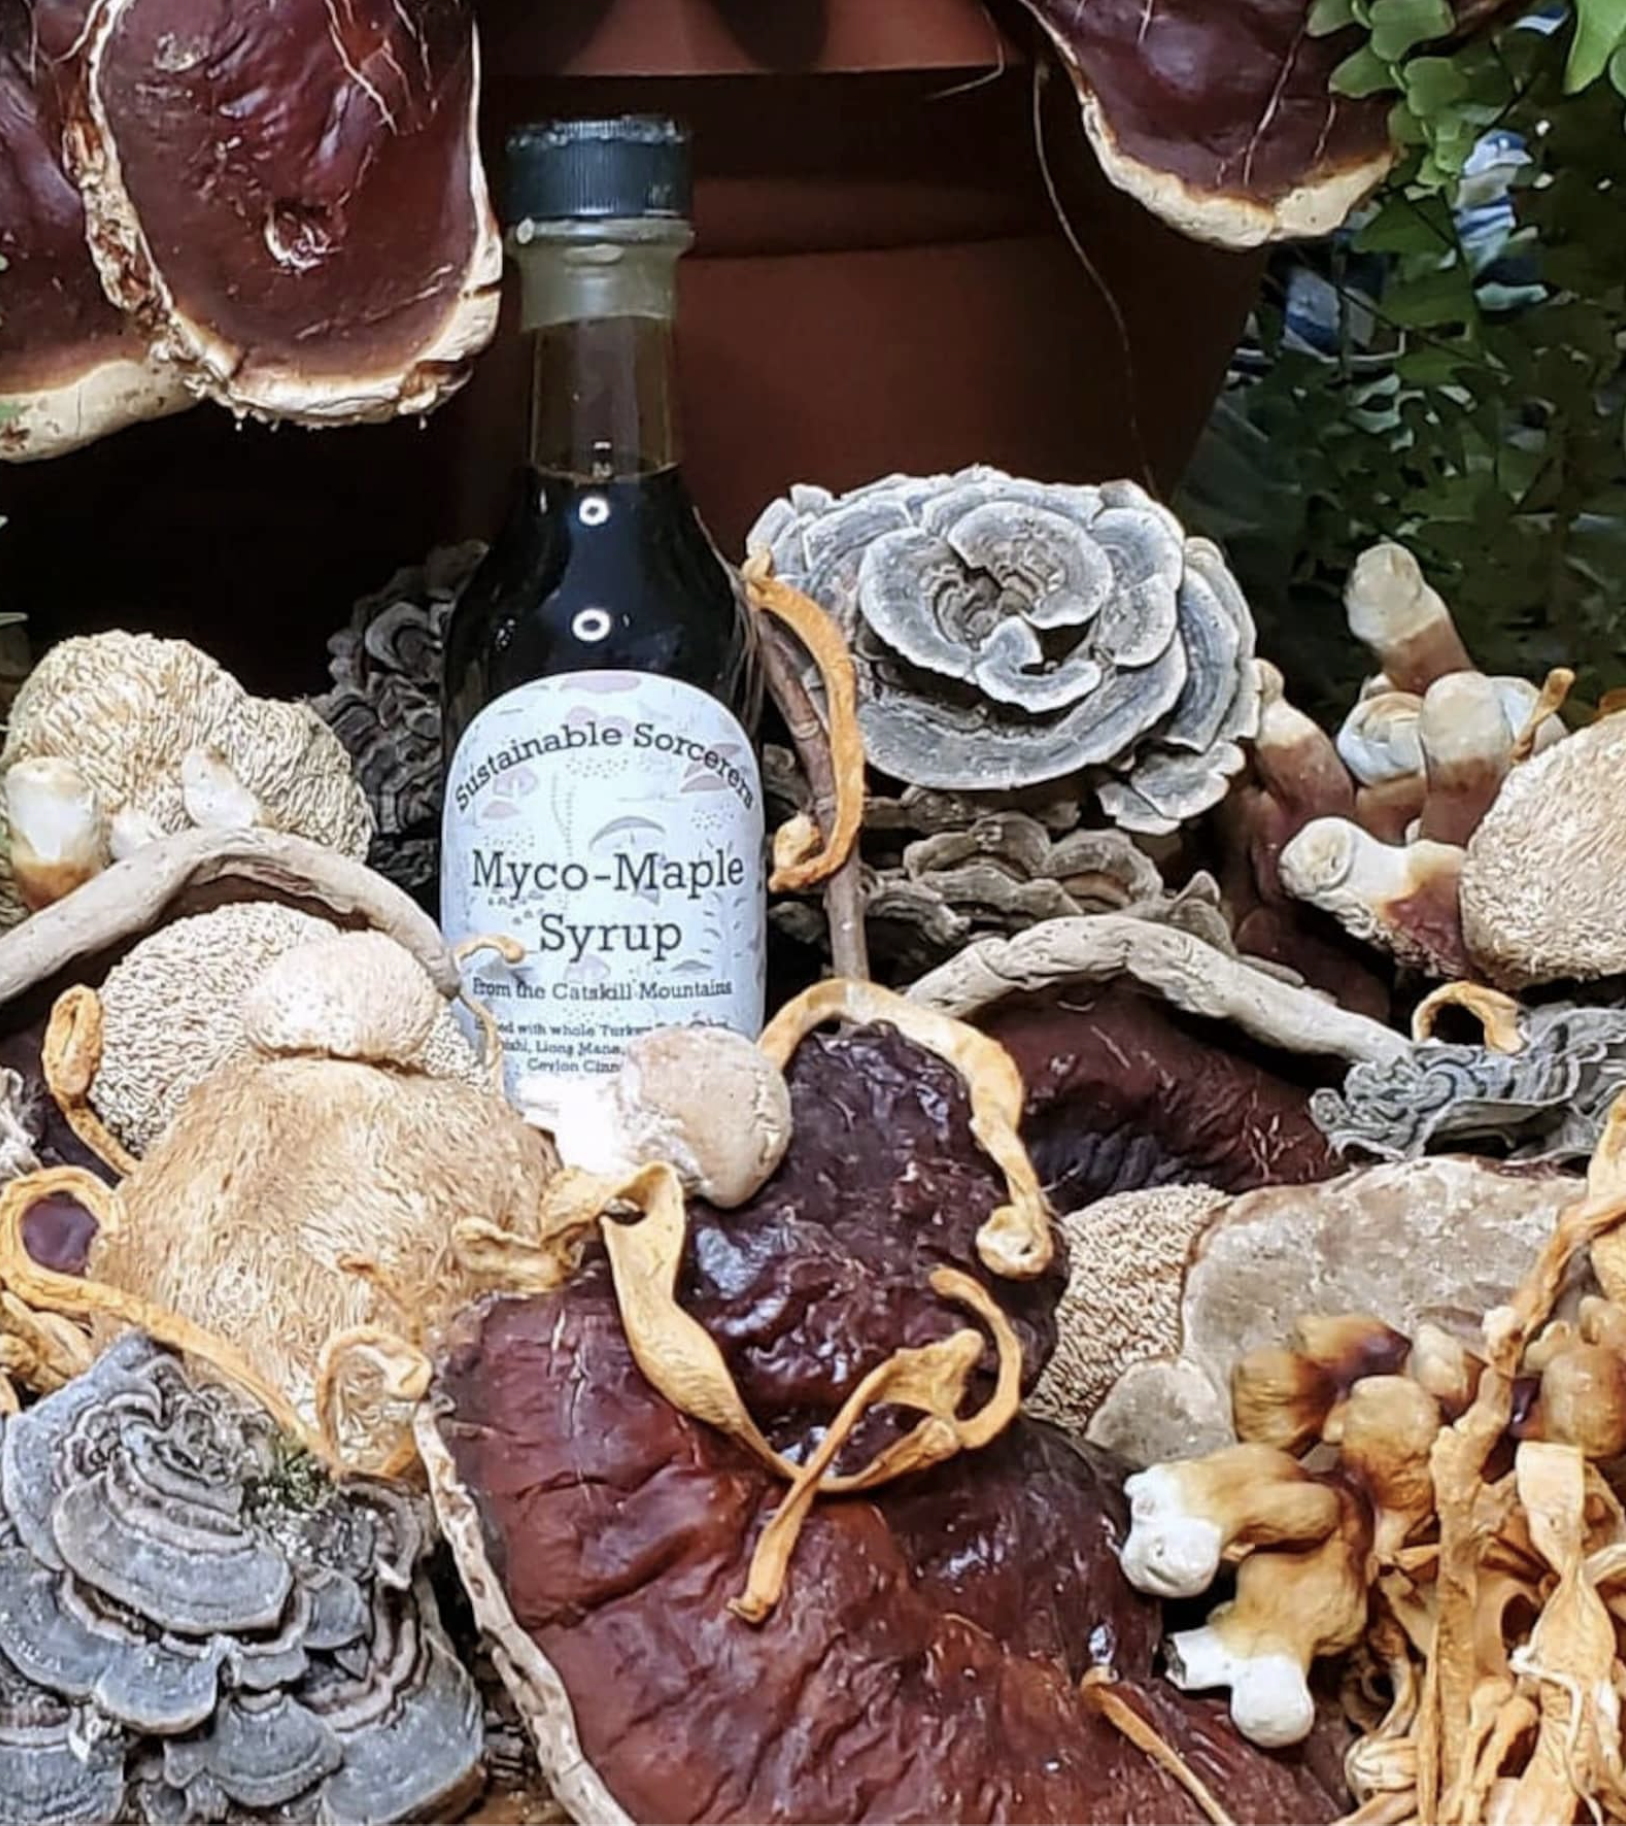 Catskill Forests Wild Harvested Myco-Maple Syrup infused with Chaga, Lions Mane, Reishi, Turkey Tail Cordyceps 5oz bottle